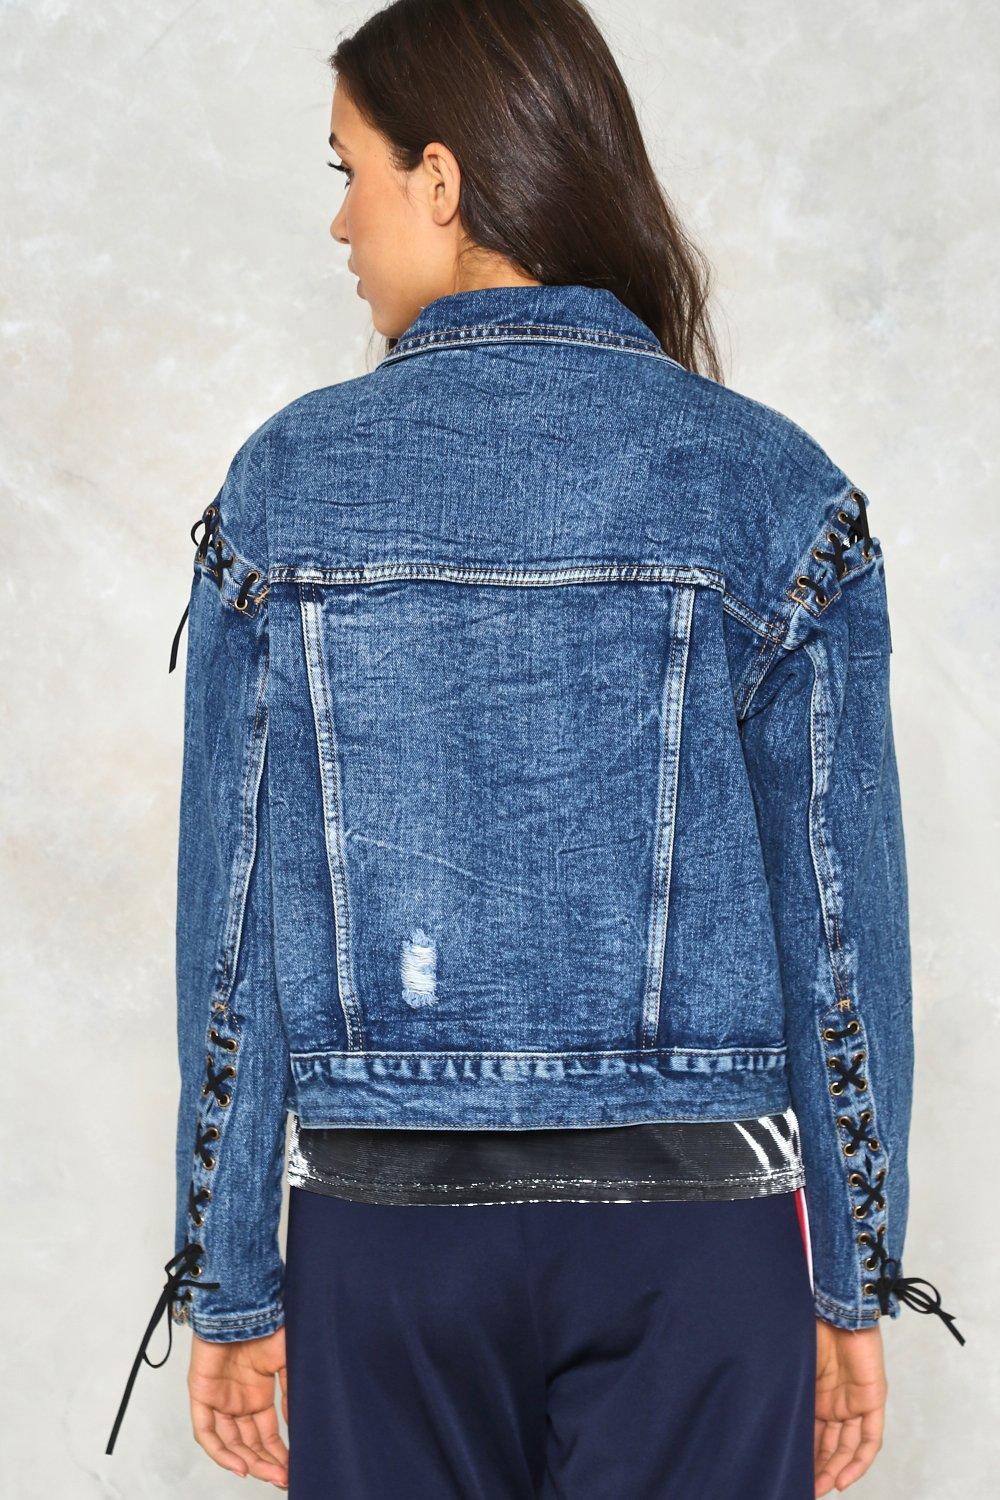 jean jacket with lace